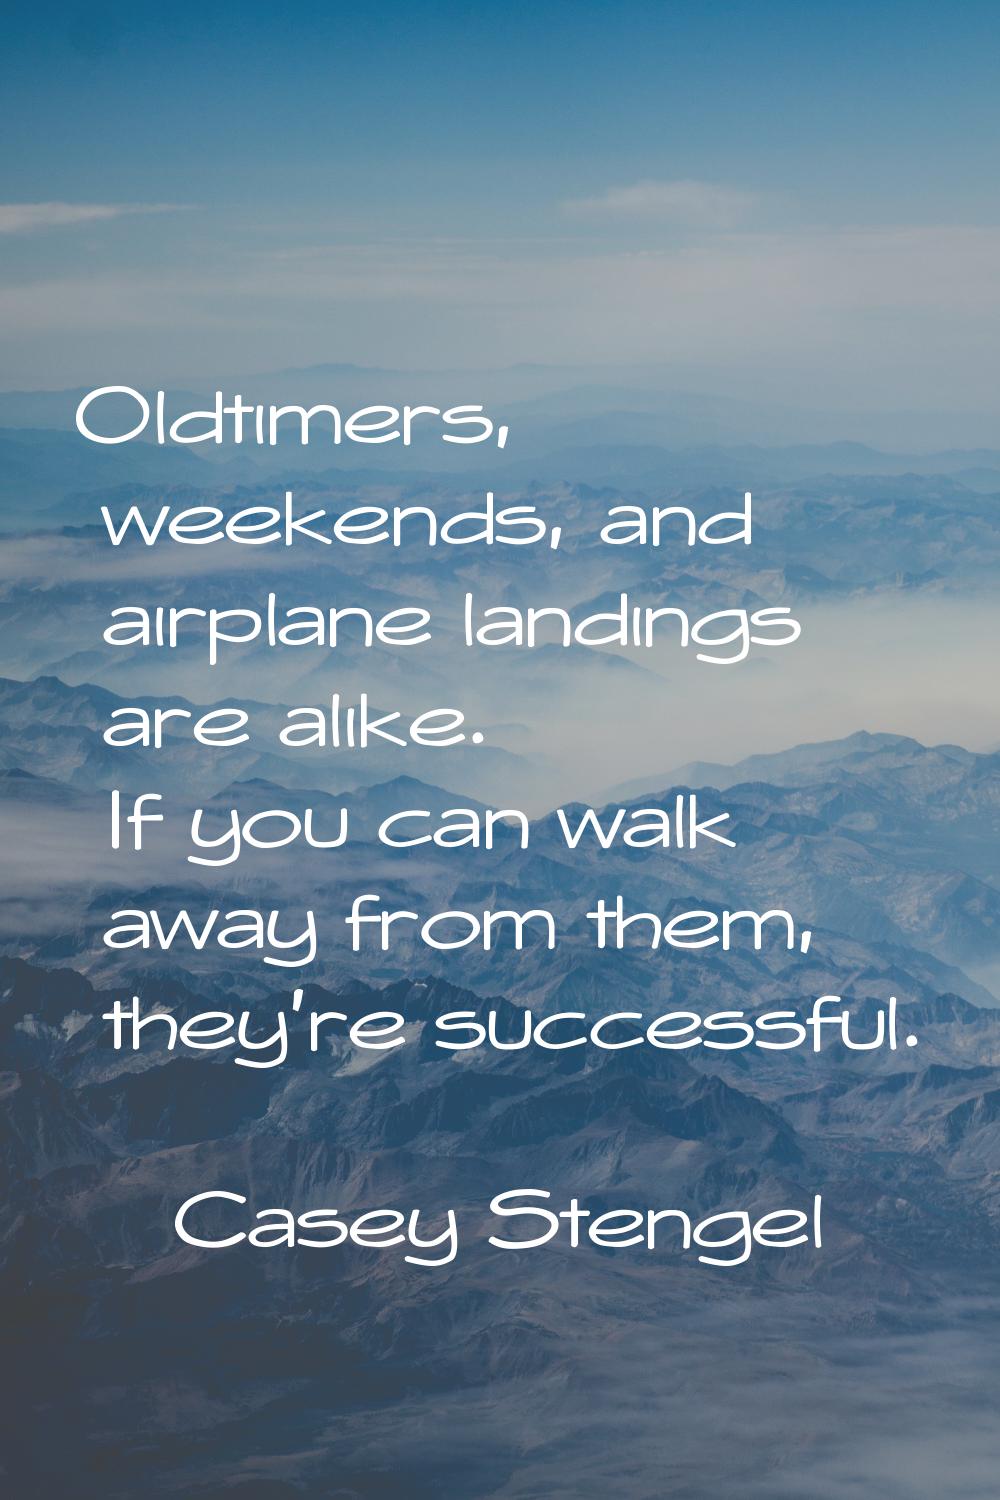 Oldtimers, weekends, and airplane landings are alike. If you can walk away from them, they're succe